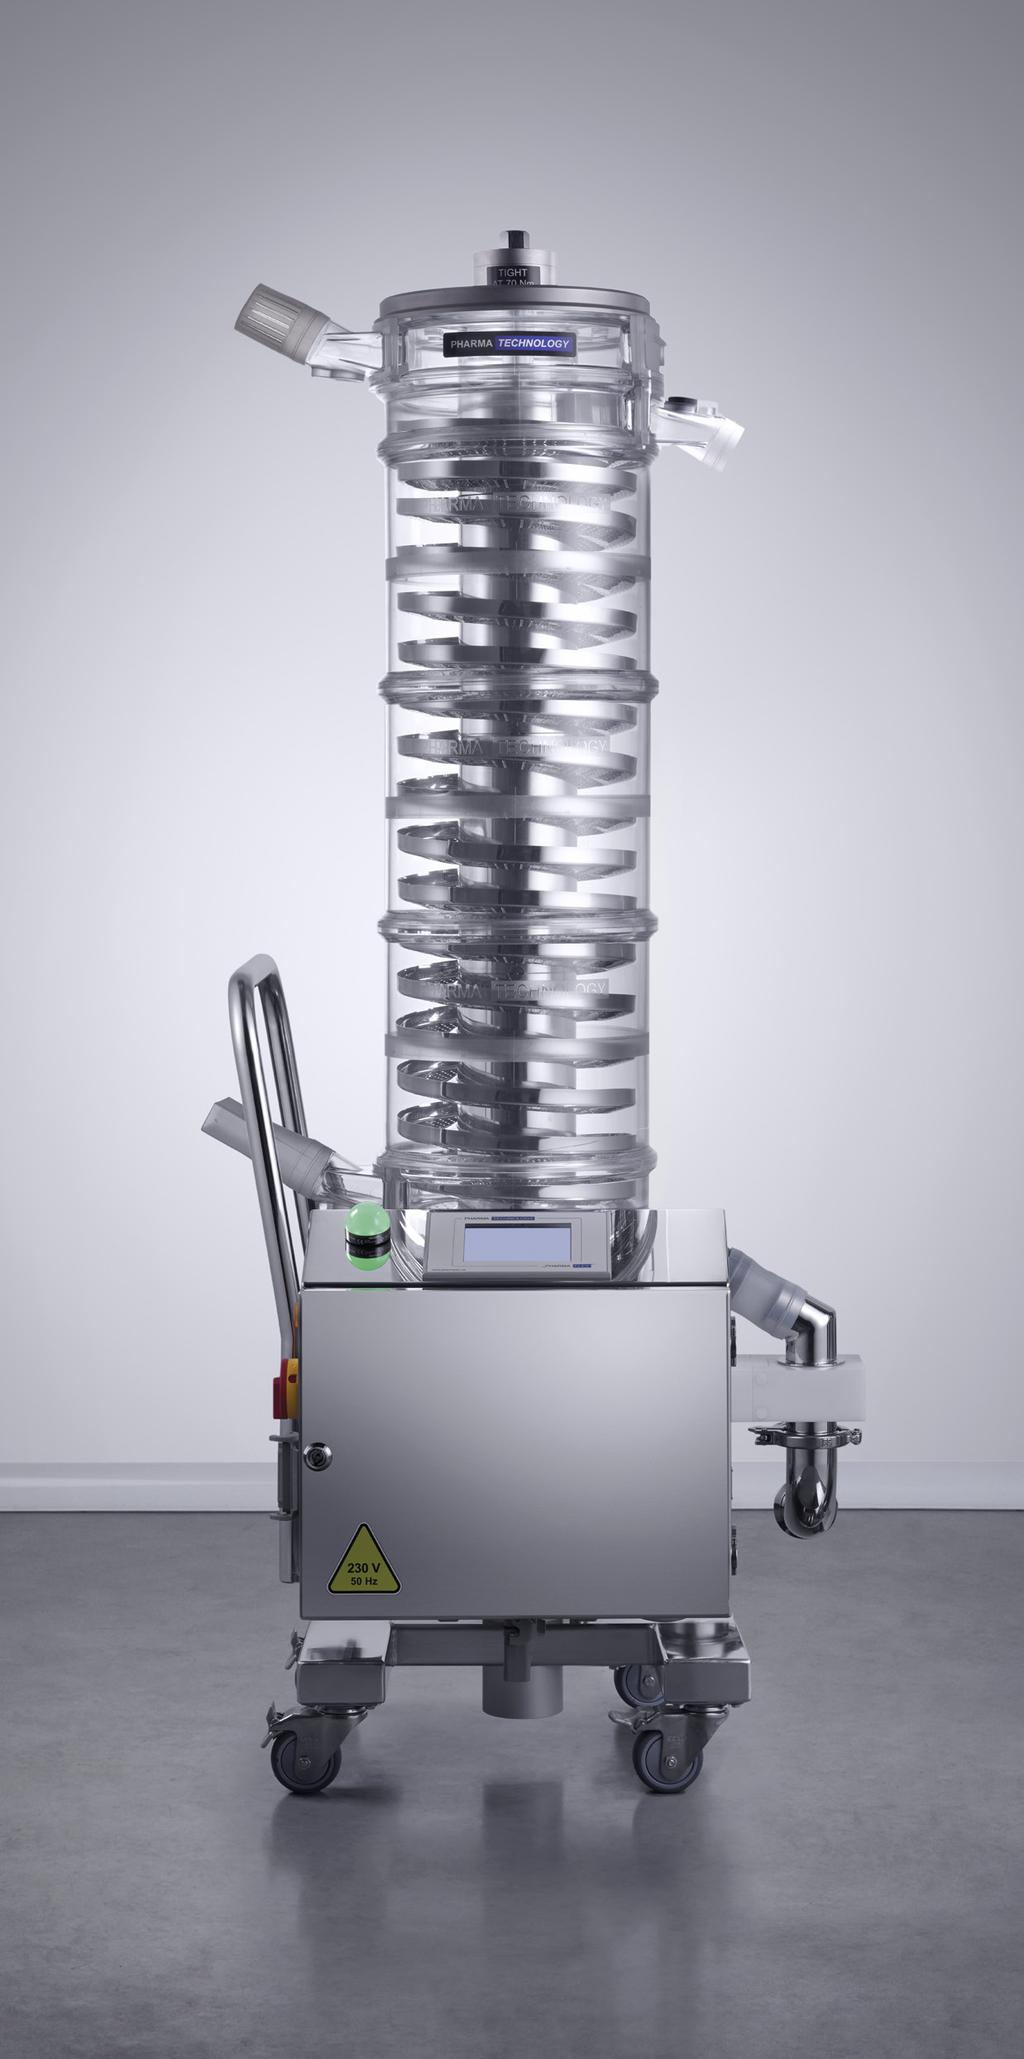 Like the original PharmaFlex range of Dedusters, each of the PF Deduster s spiral segments can be removed individually for easier cleaning and fast changeover.